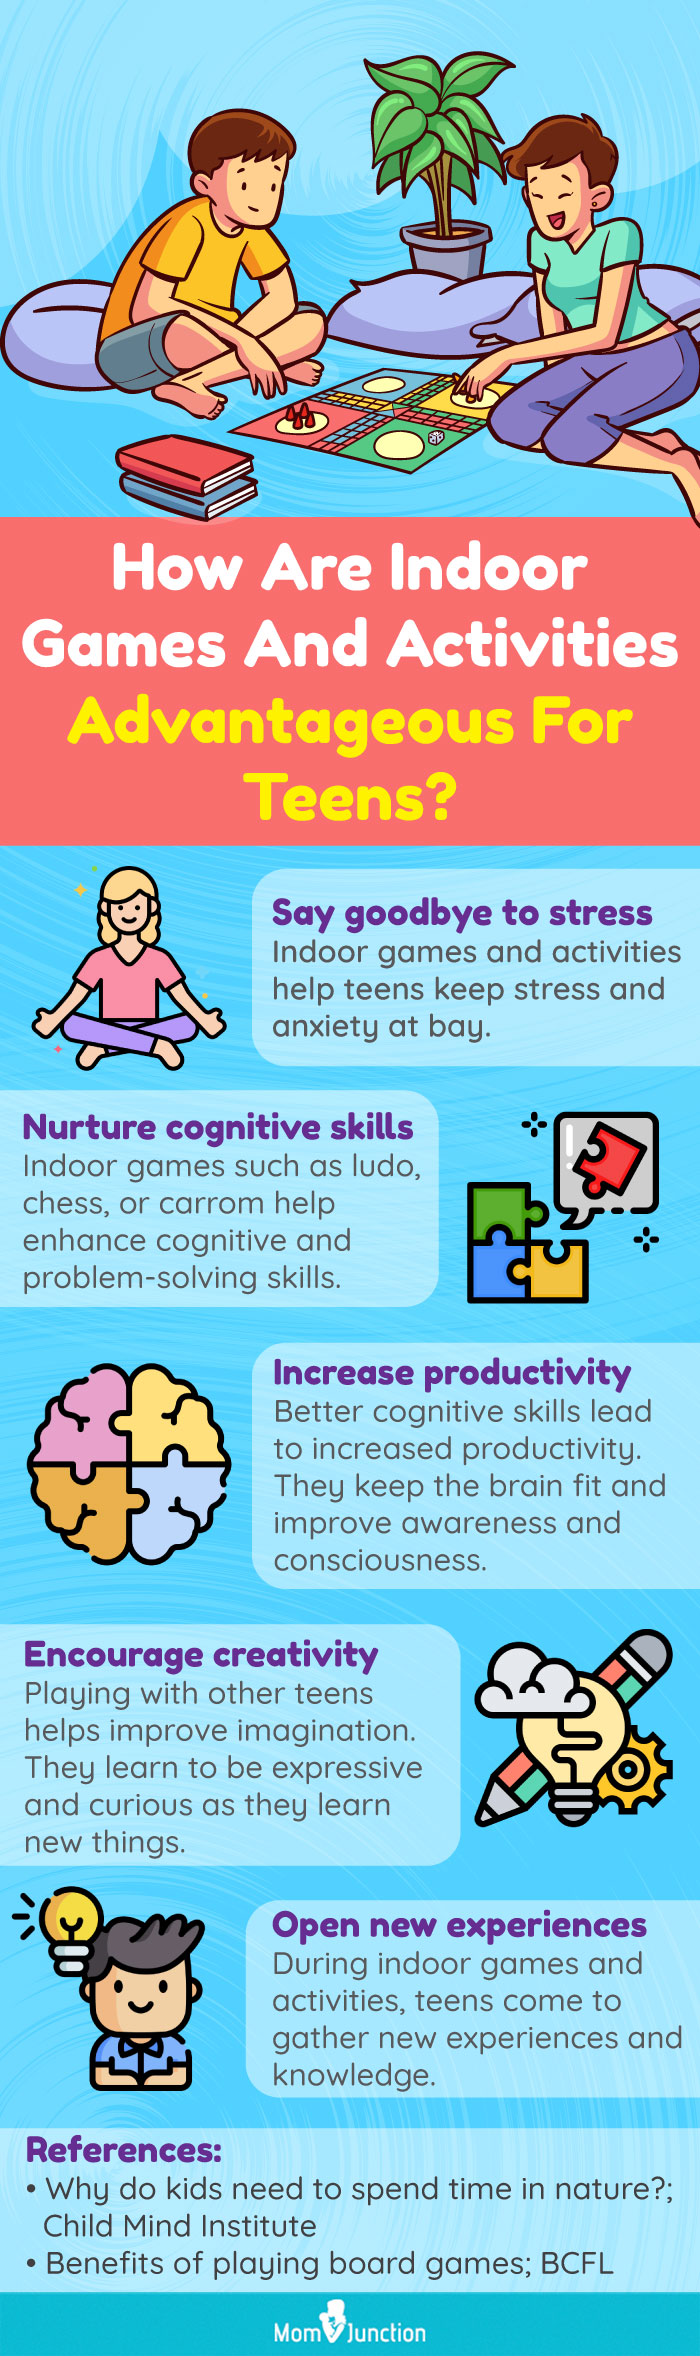 how are indoor games and activities advantageous for teens (infographic)